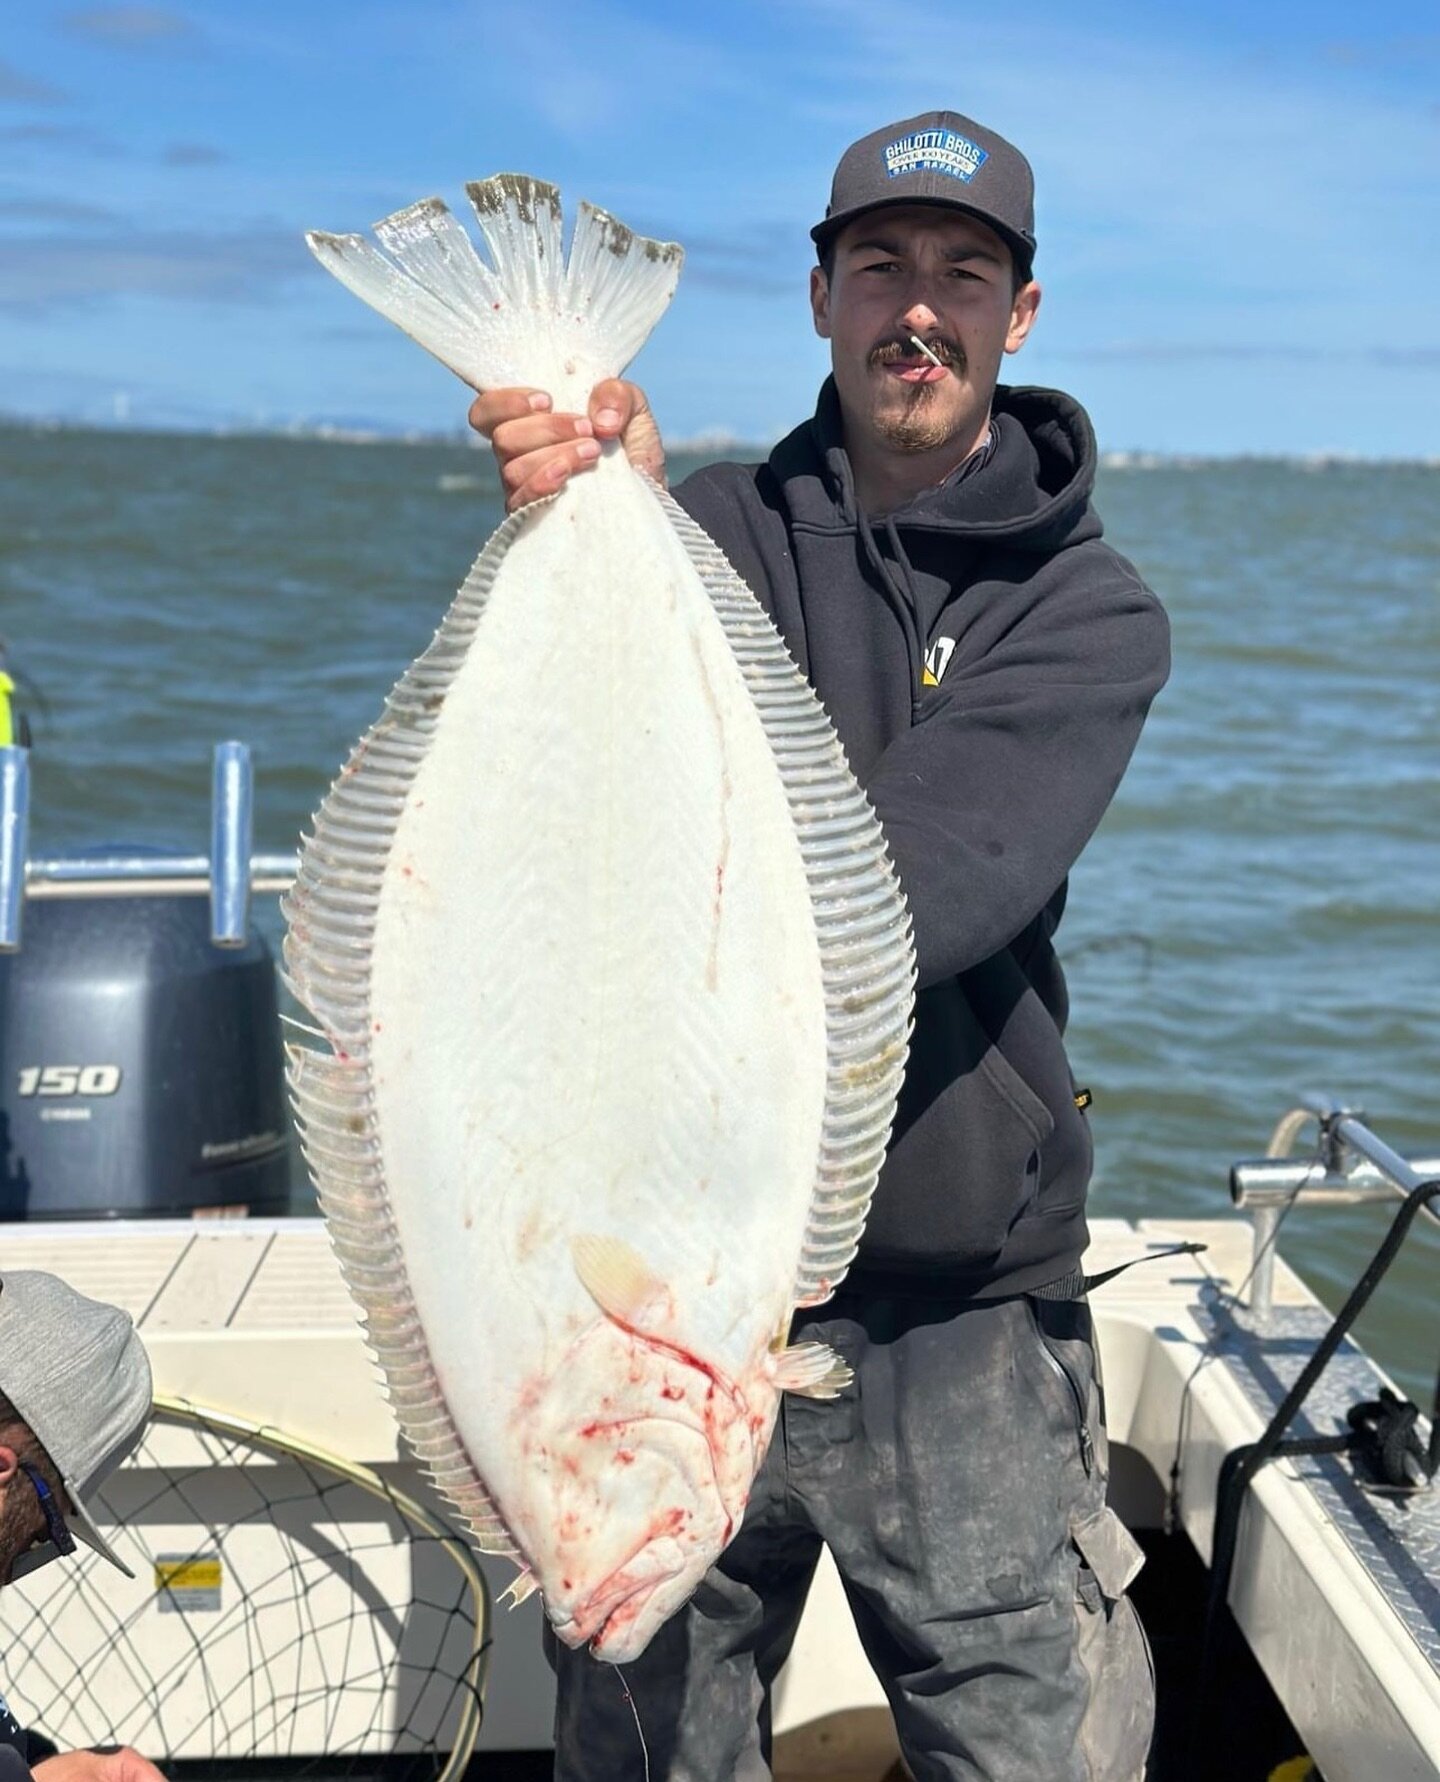 It&rsquo;s that time of year again who&rsquo;s ready??? 🏴&zwj;☠️🏴&zwj;☠️🏴&zwj;☠️
#goldenstateguideservice #halibut #fishing #sanfranciscobay